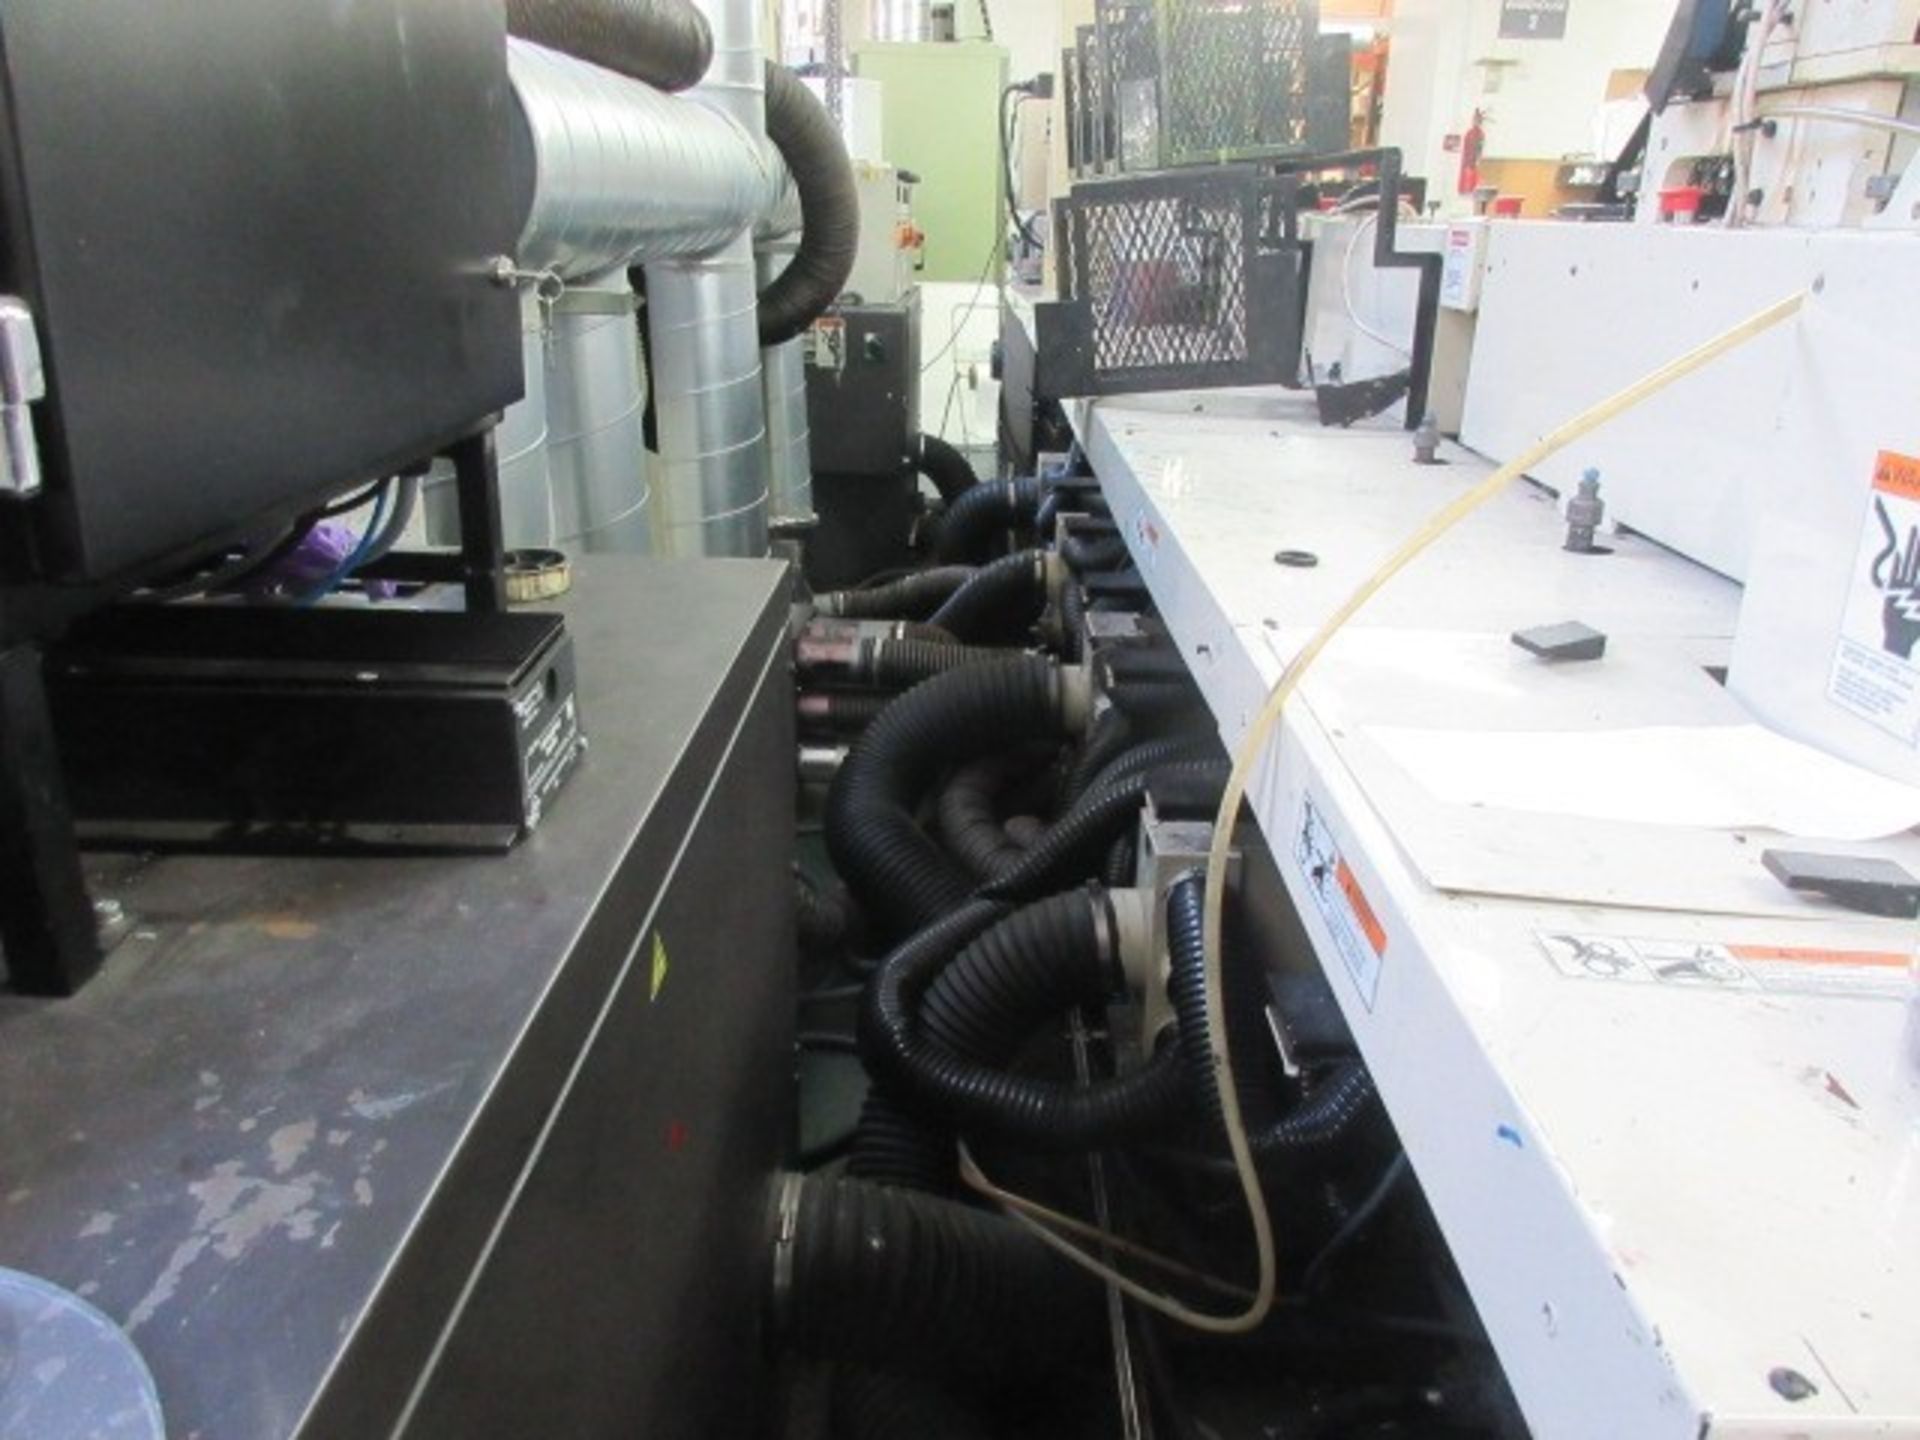 Mark Andy 2200-10F 10” 8 colour flexographic label printing press. Serial no: 1260086 (2002) - Image 347 of 383